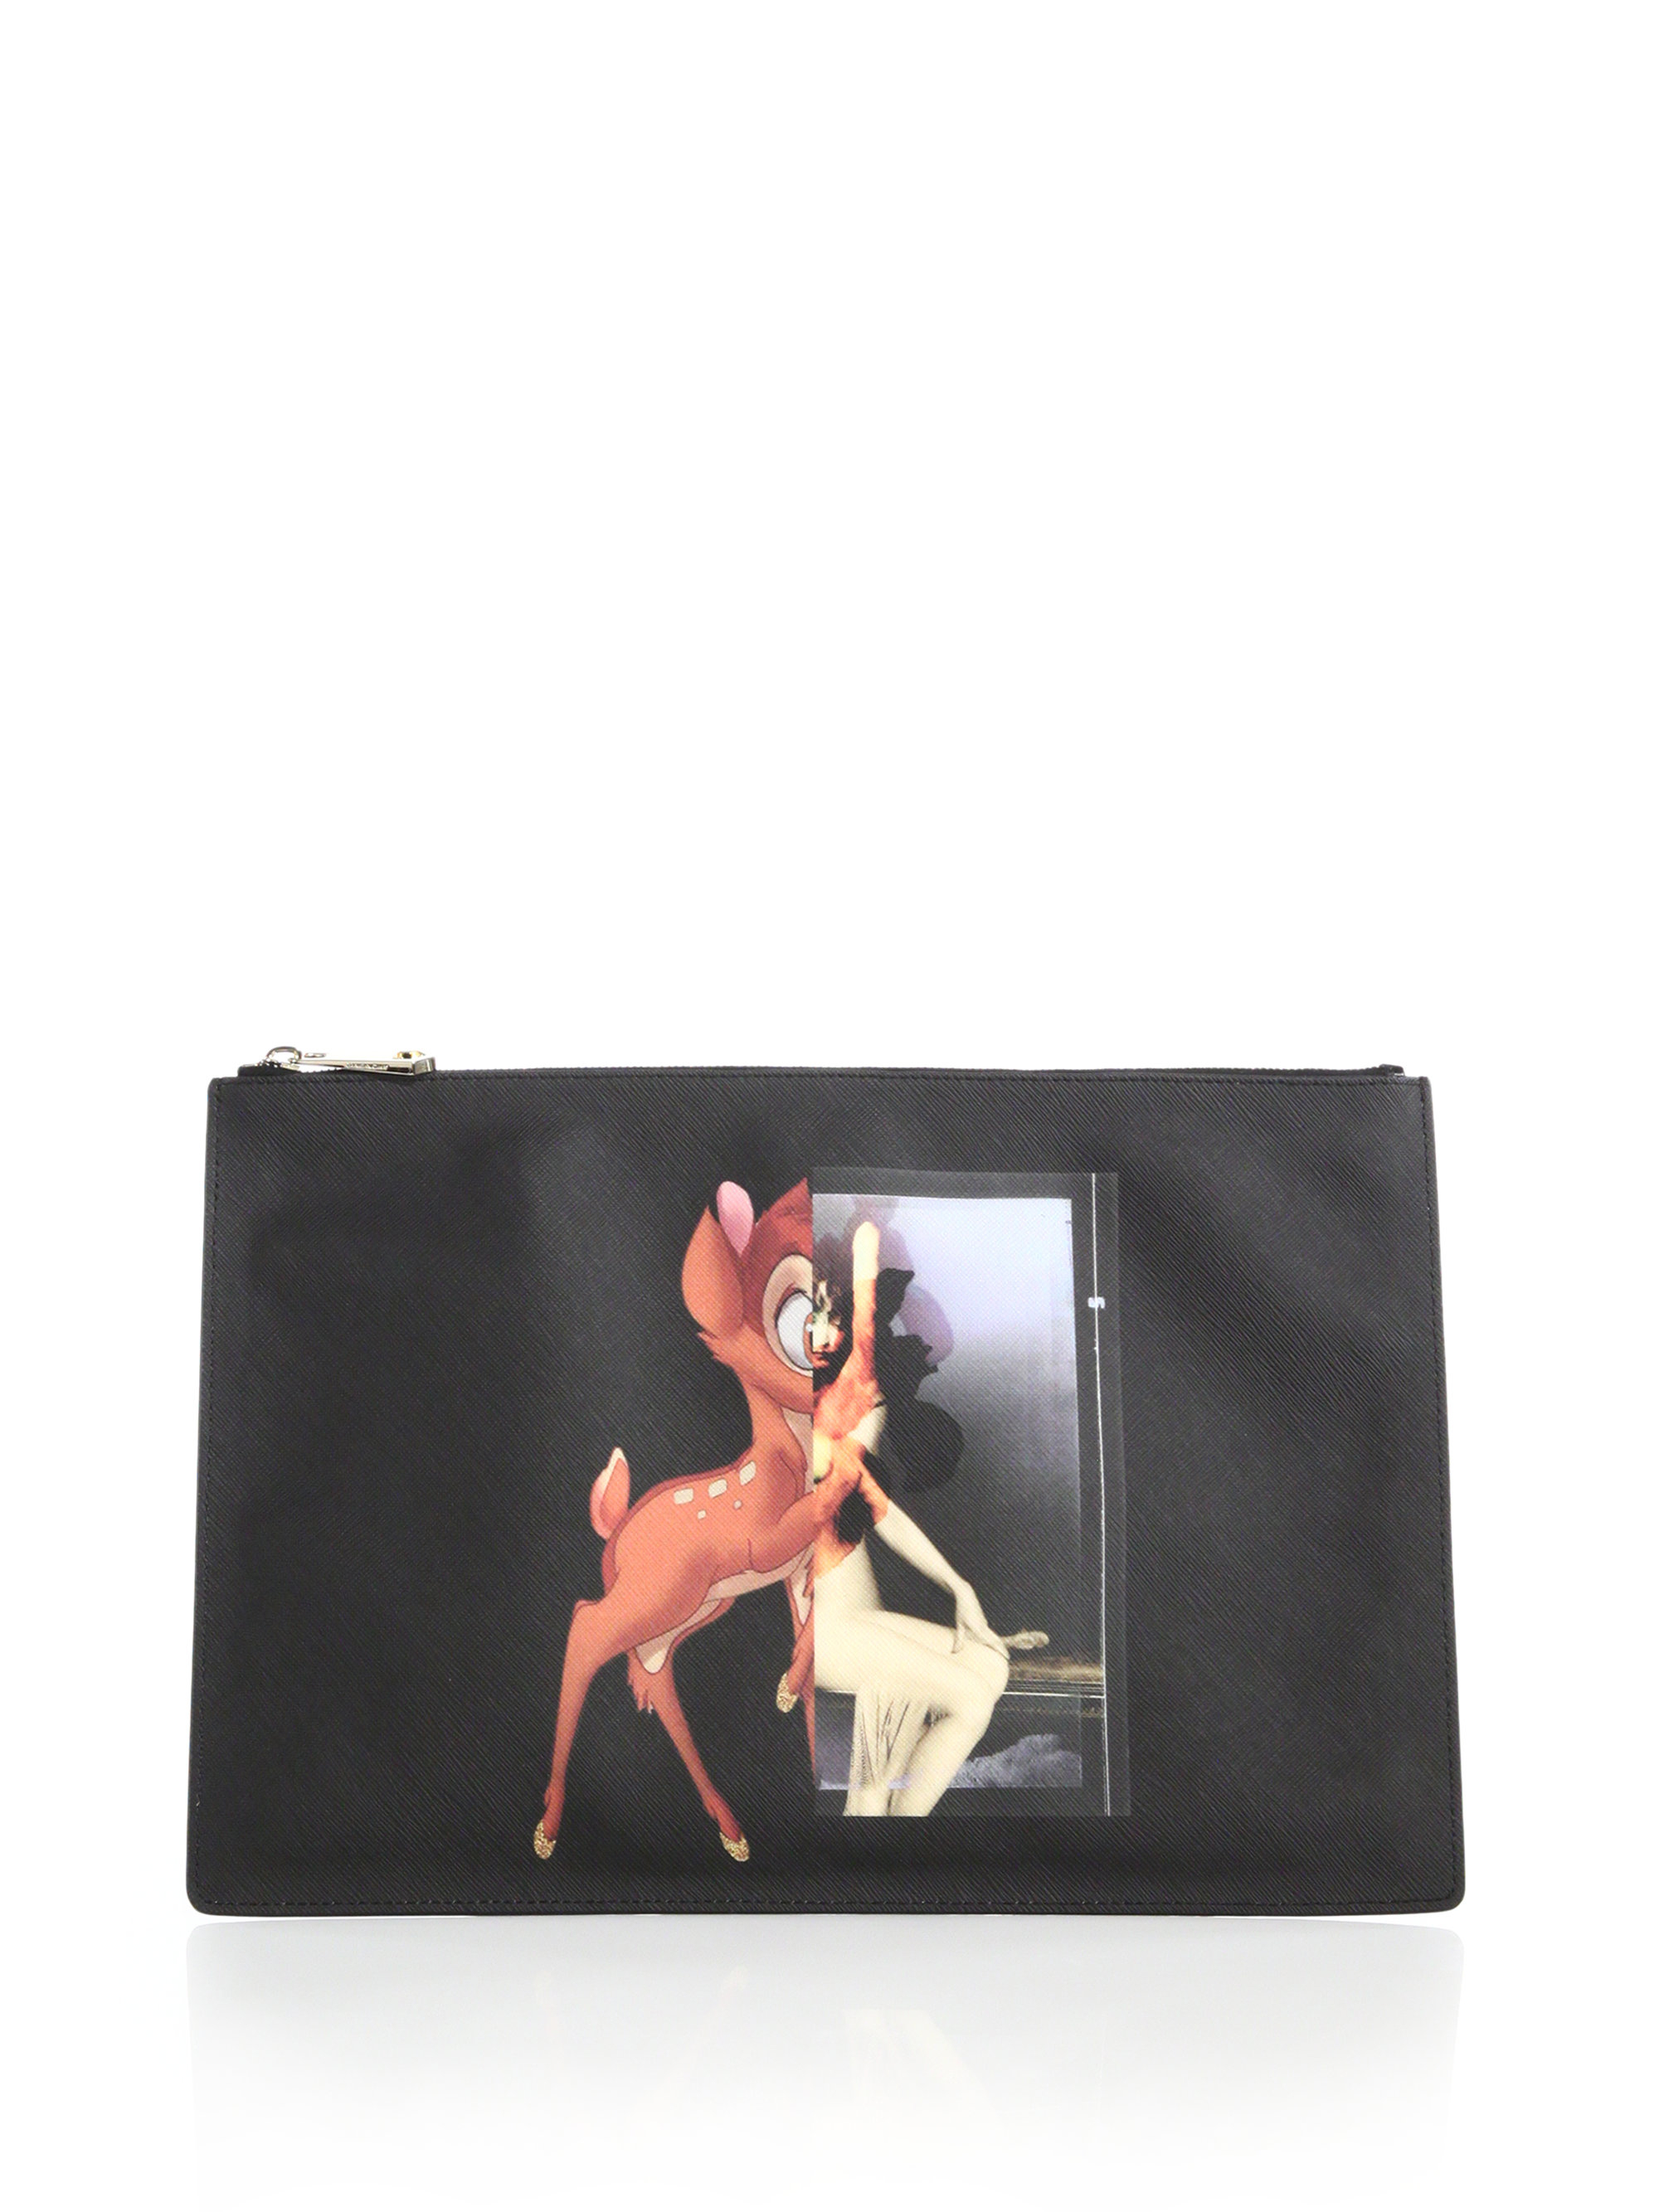 Givenchy Bambi Saffiano Leather Clutch 